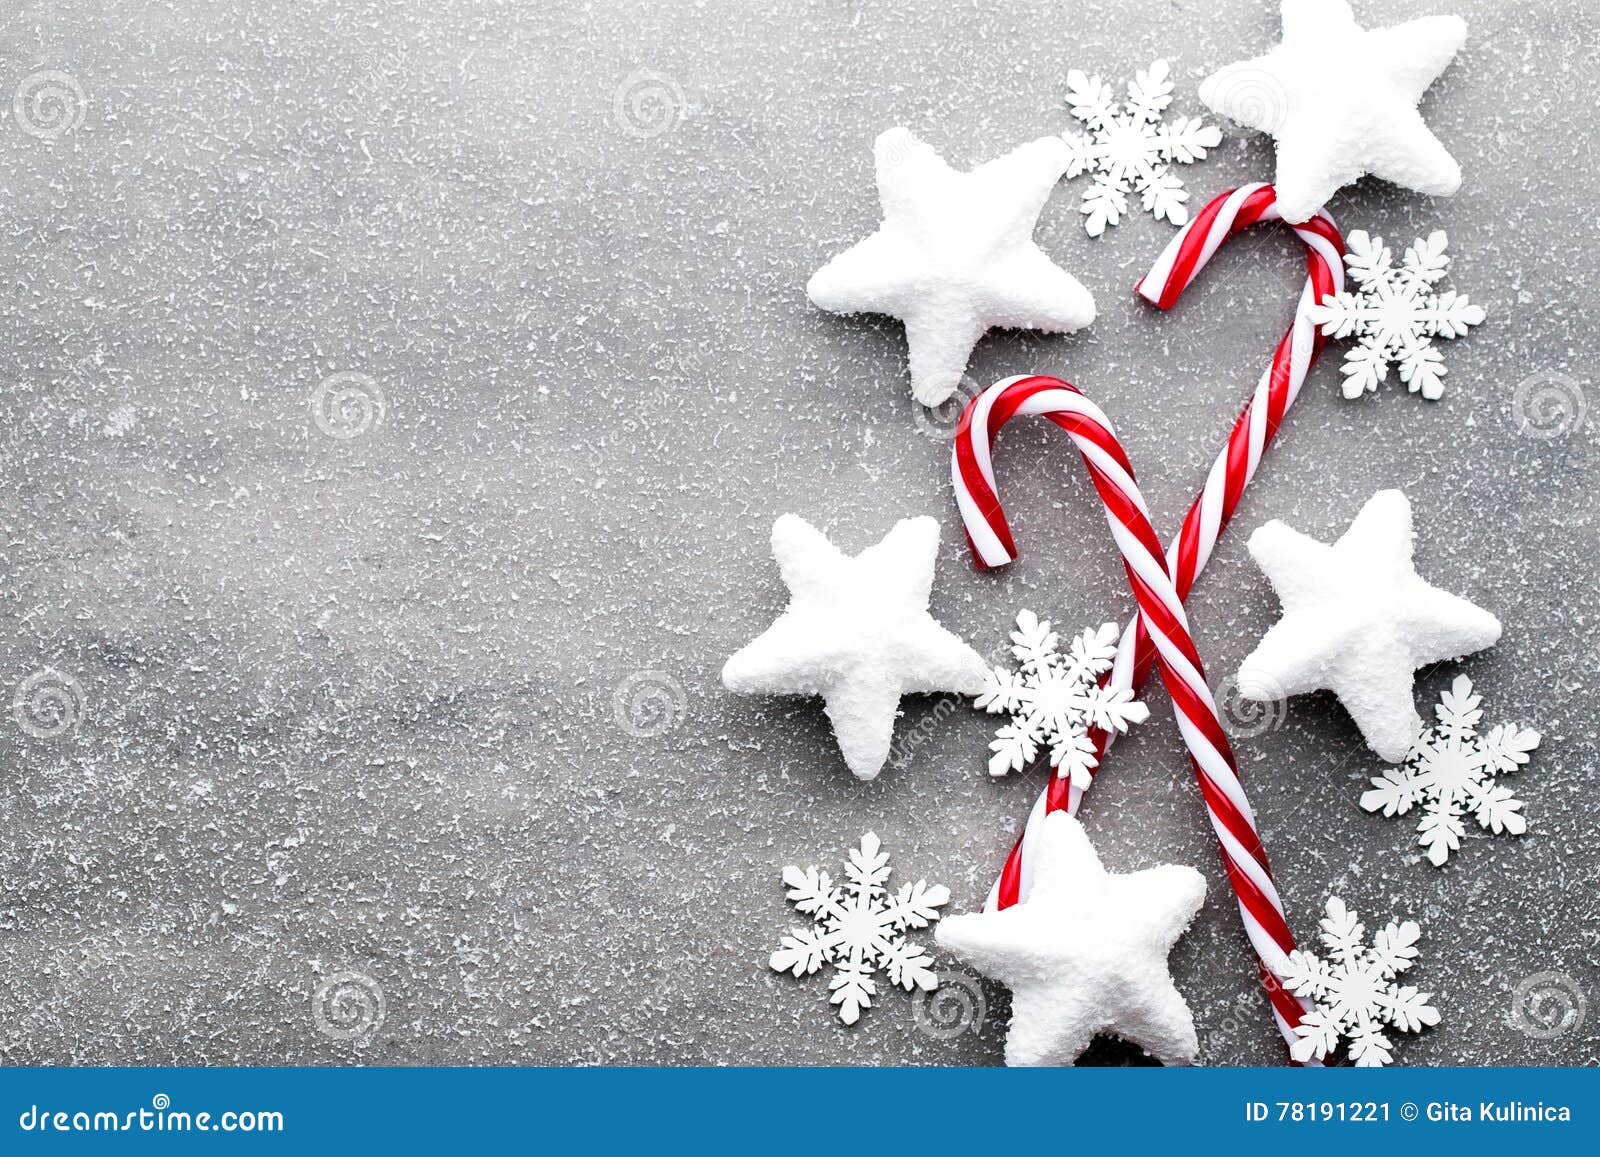 Candy Cane. Christmas Decors with Gray Background. Stock Image - Image ...